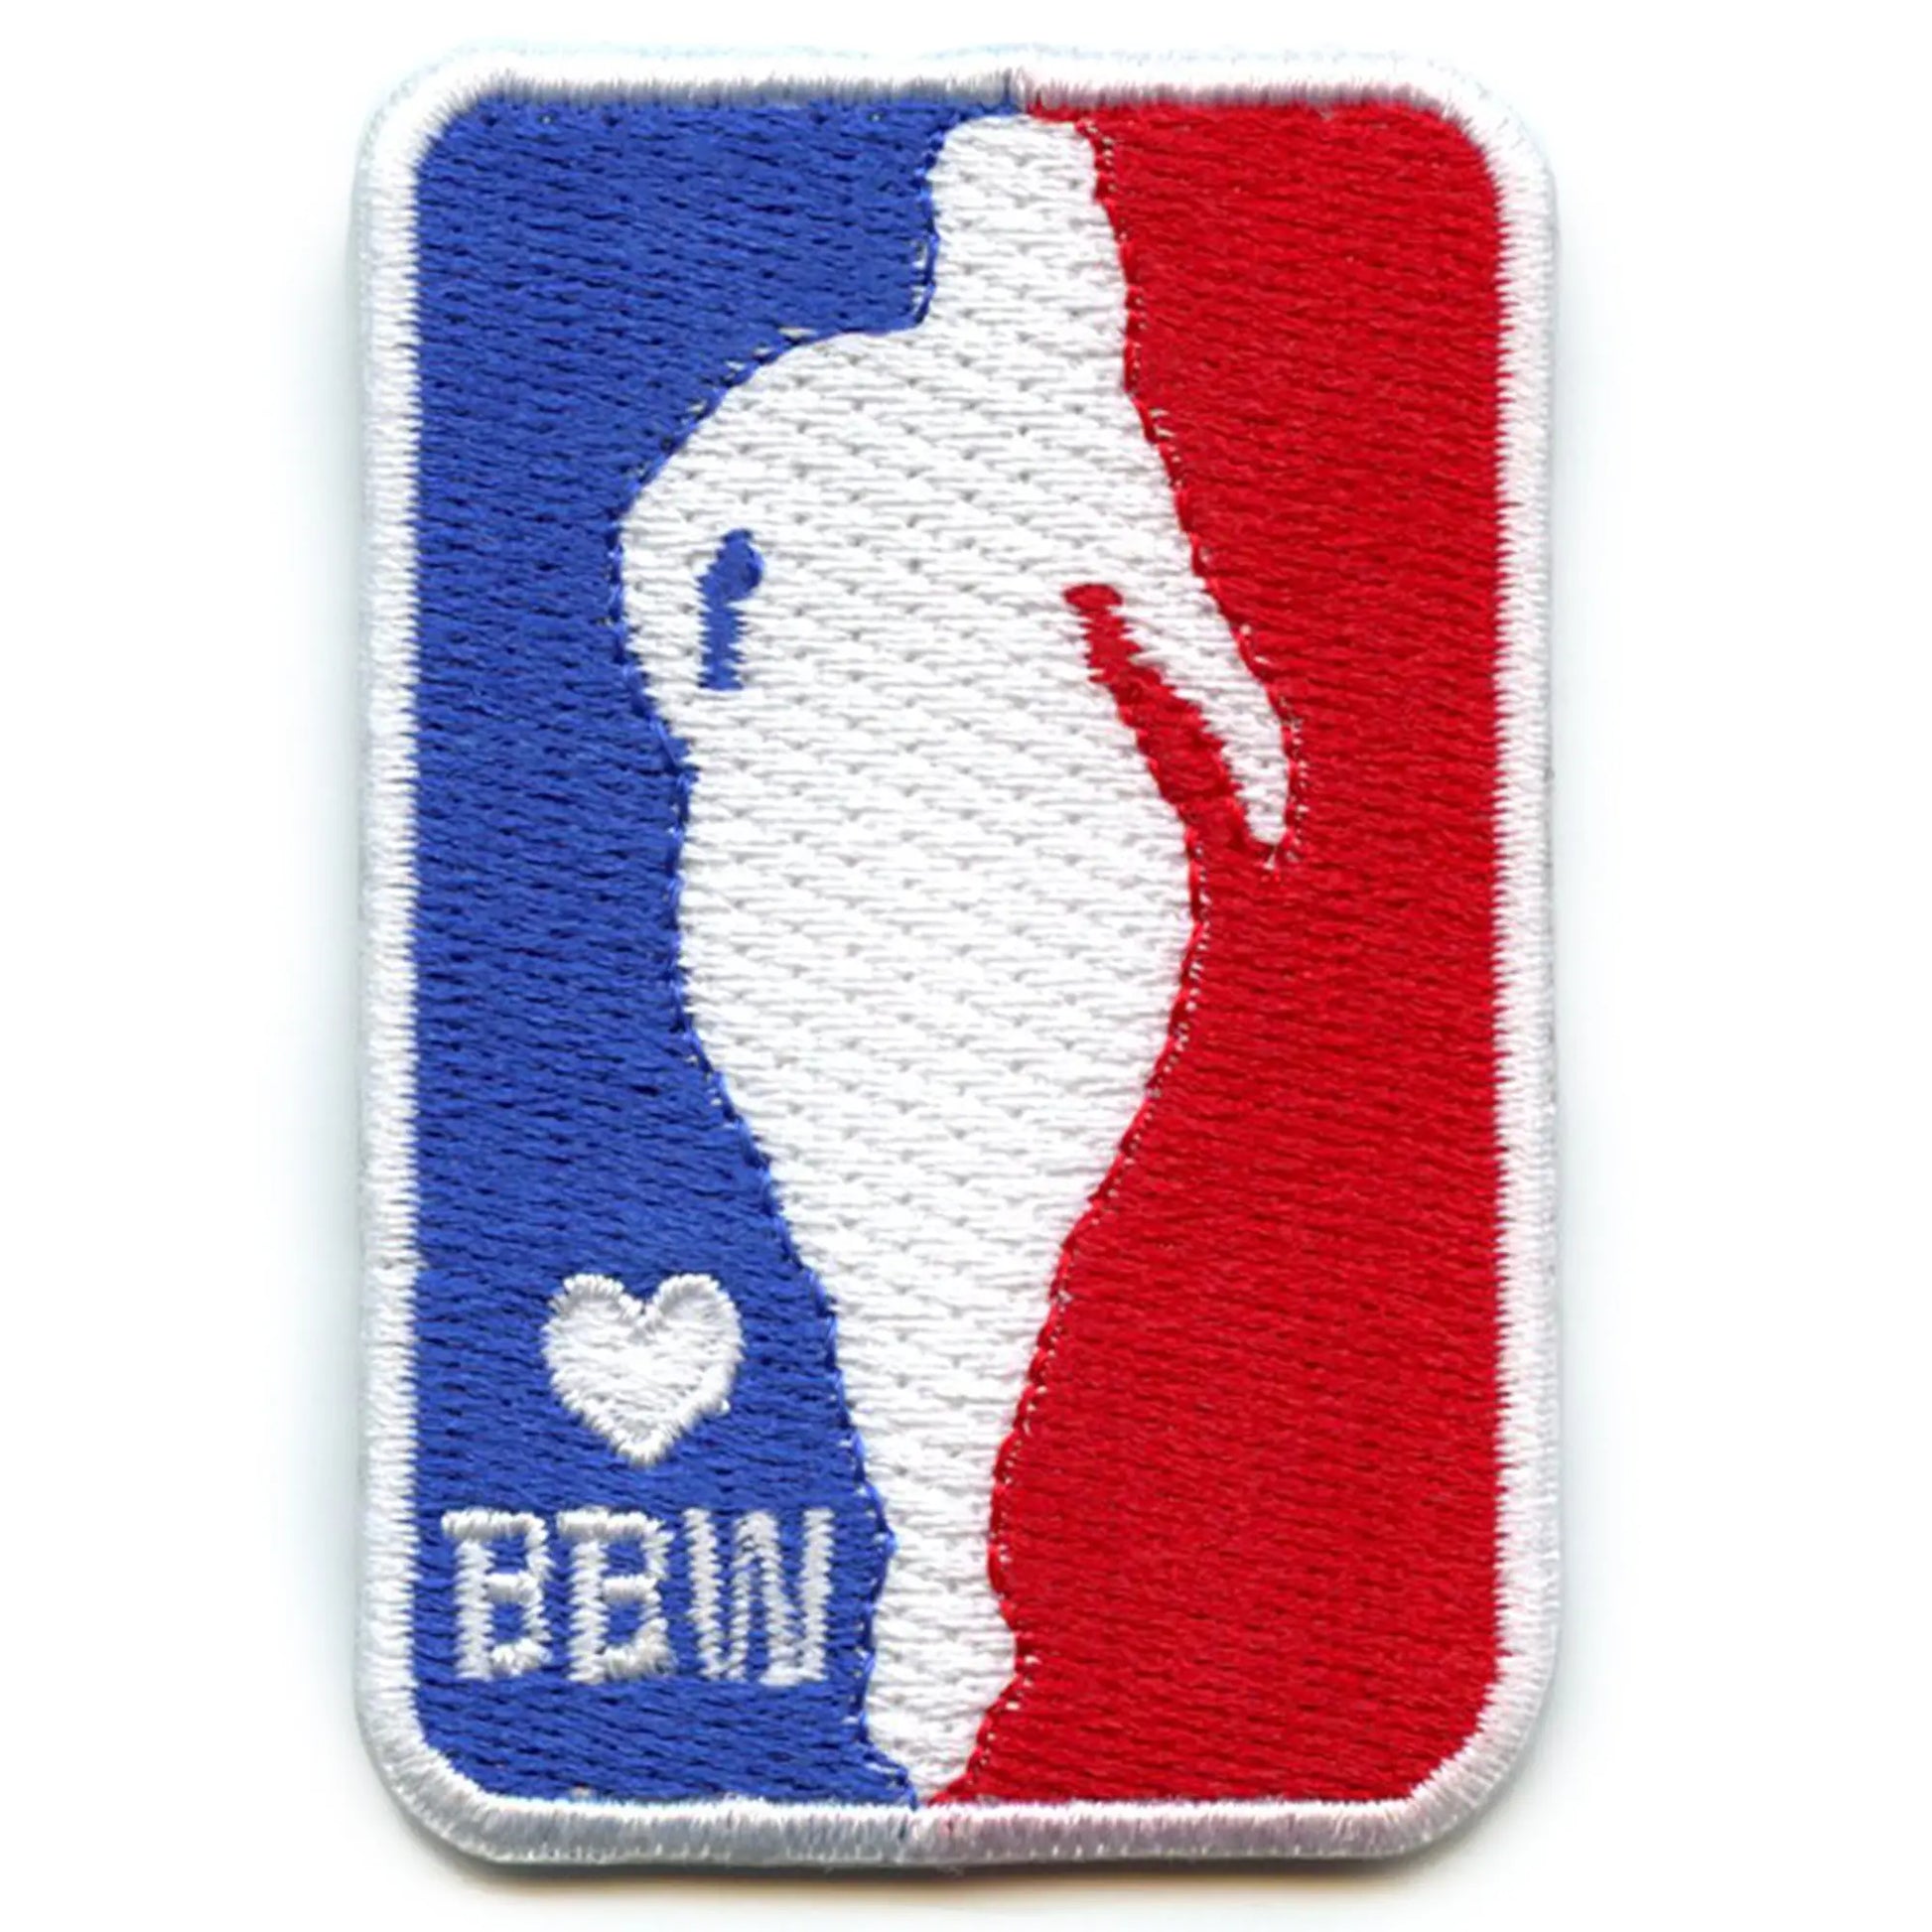 BBW Basketball Logo Patch Parody Funny Embroidered Iron On